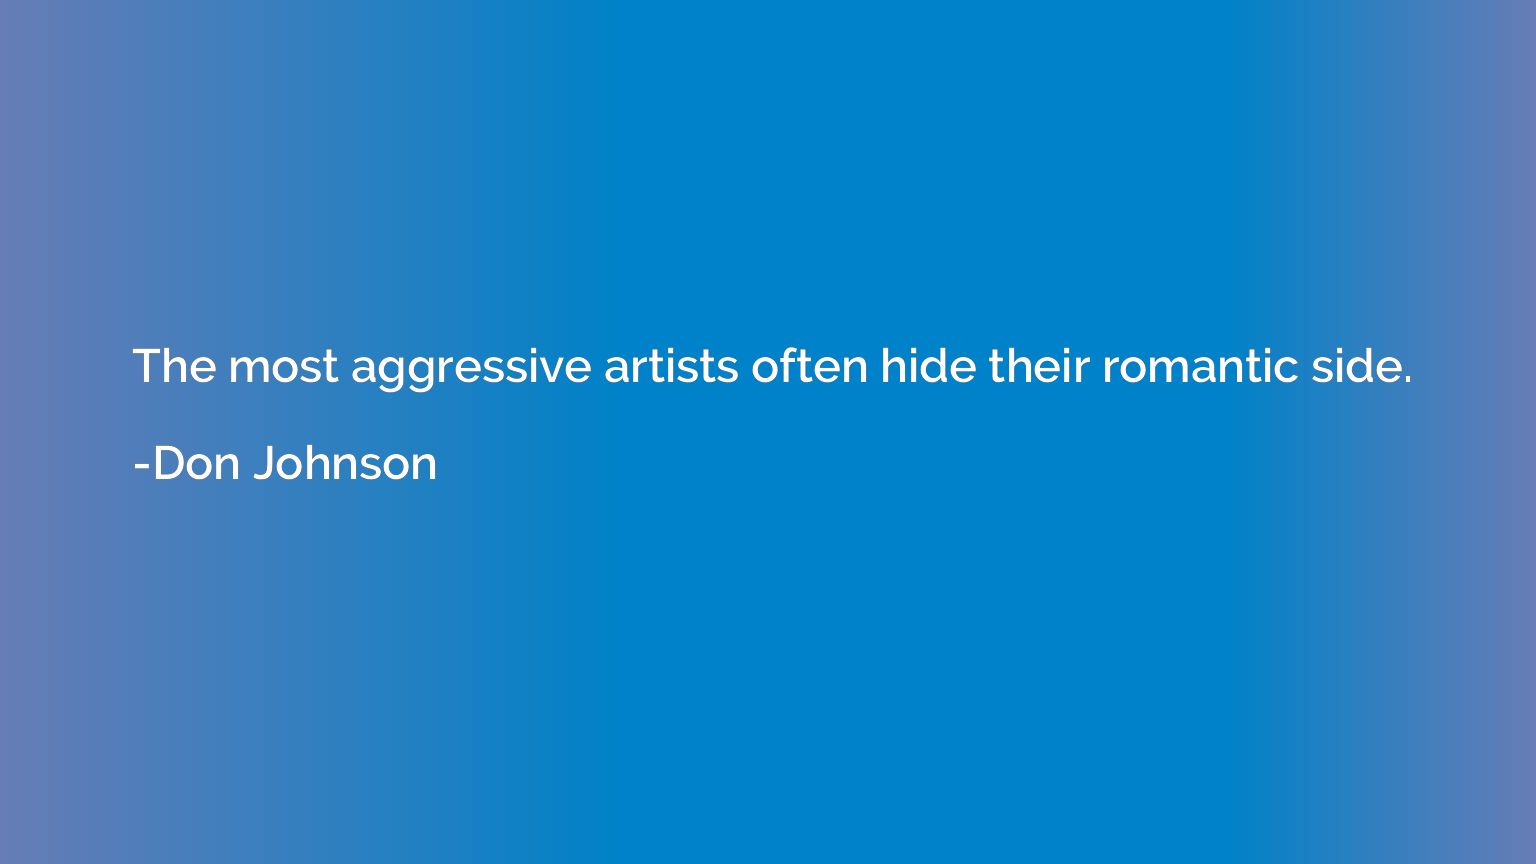 The most aggressive artists often hide their romantic side.